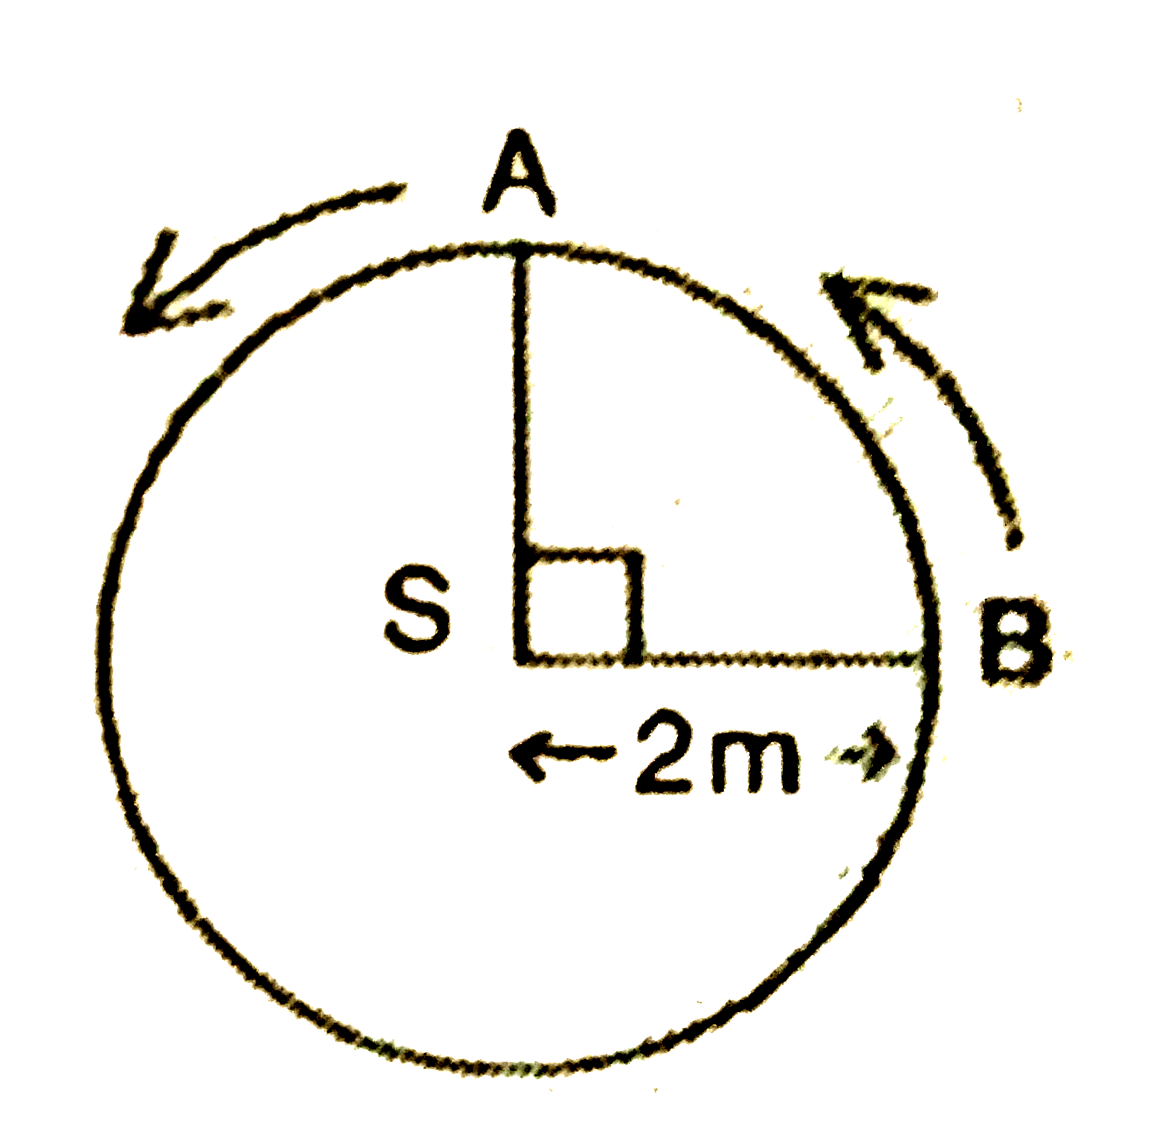 A source which is situated at the centre of a circle is producing sound . Then the change in frequency (f) of sound heared by two persons at 'A' and 'B' if they move with velocities 20 m s^(-1) and 10 m s^(-1) , respectively , along the circular path as shown in figure is